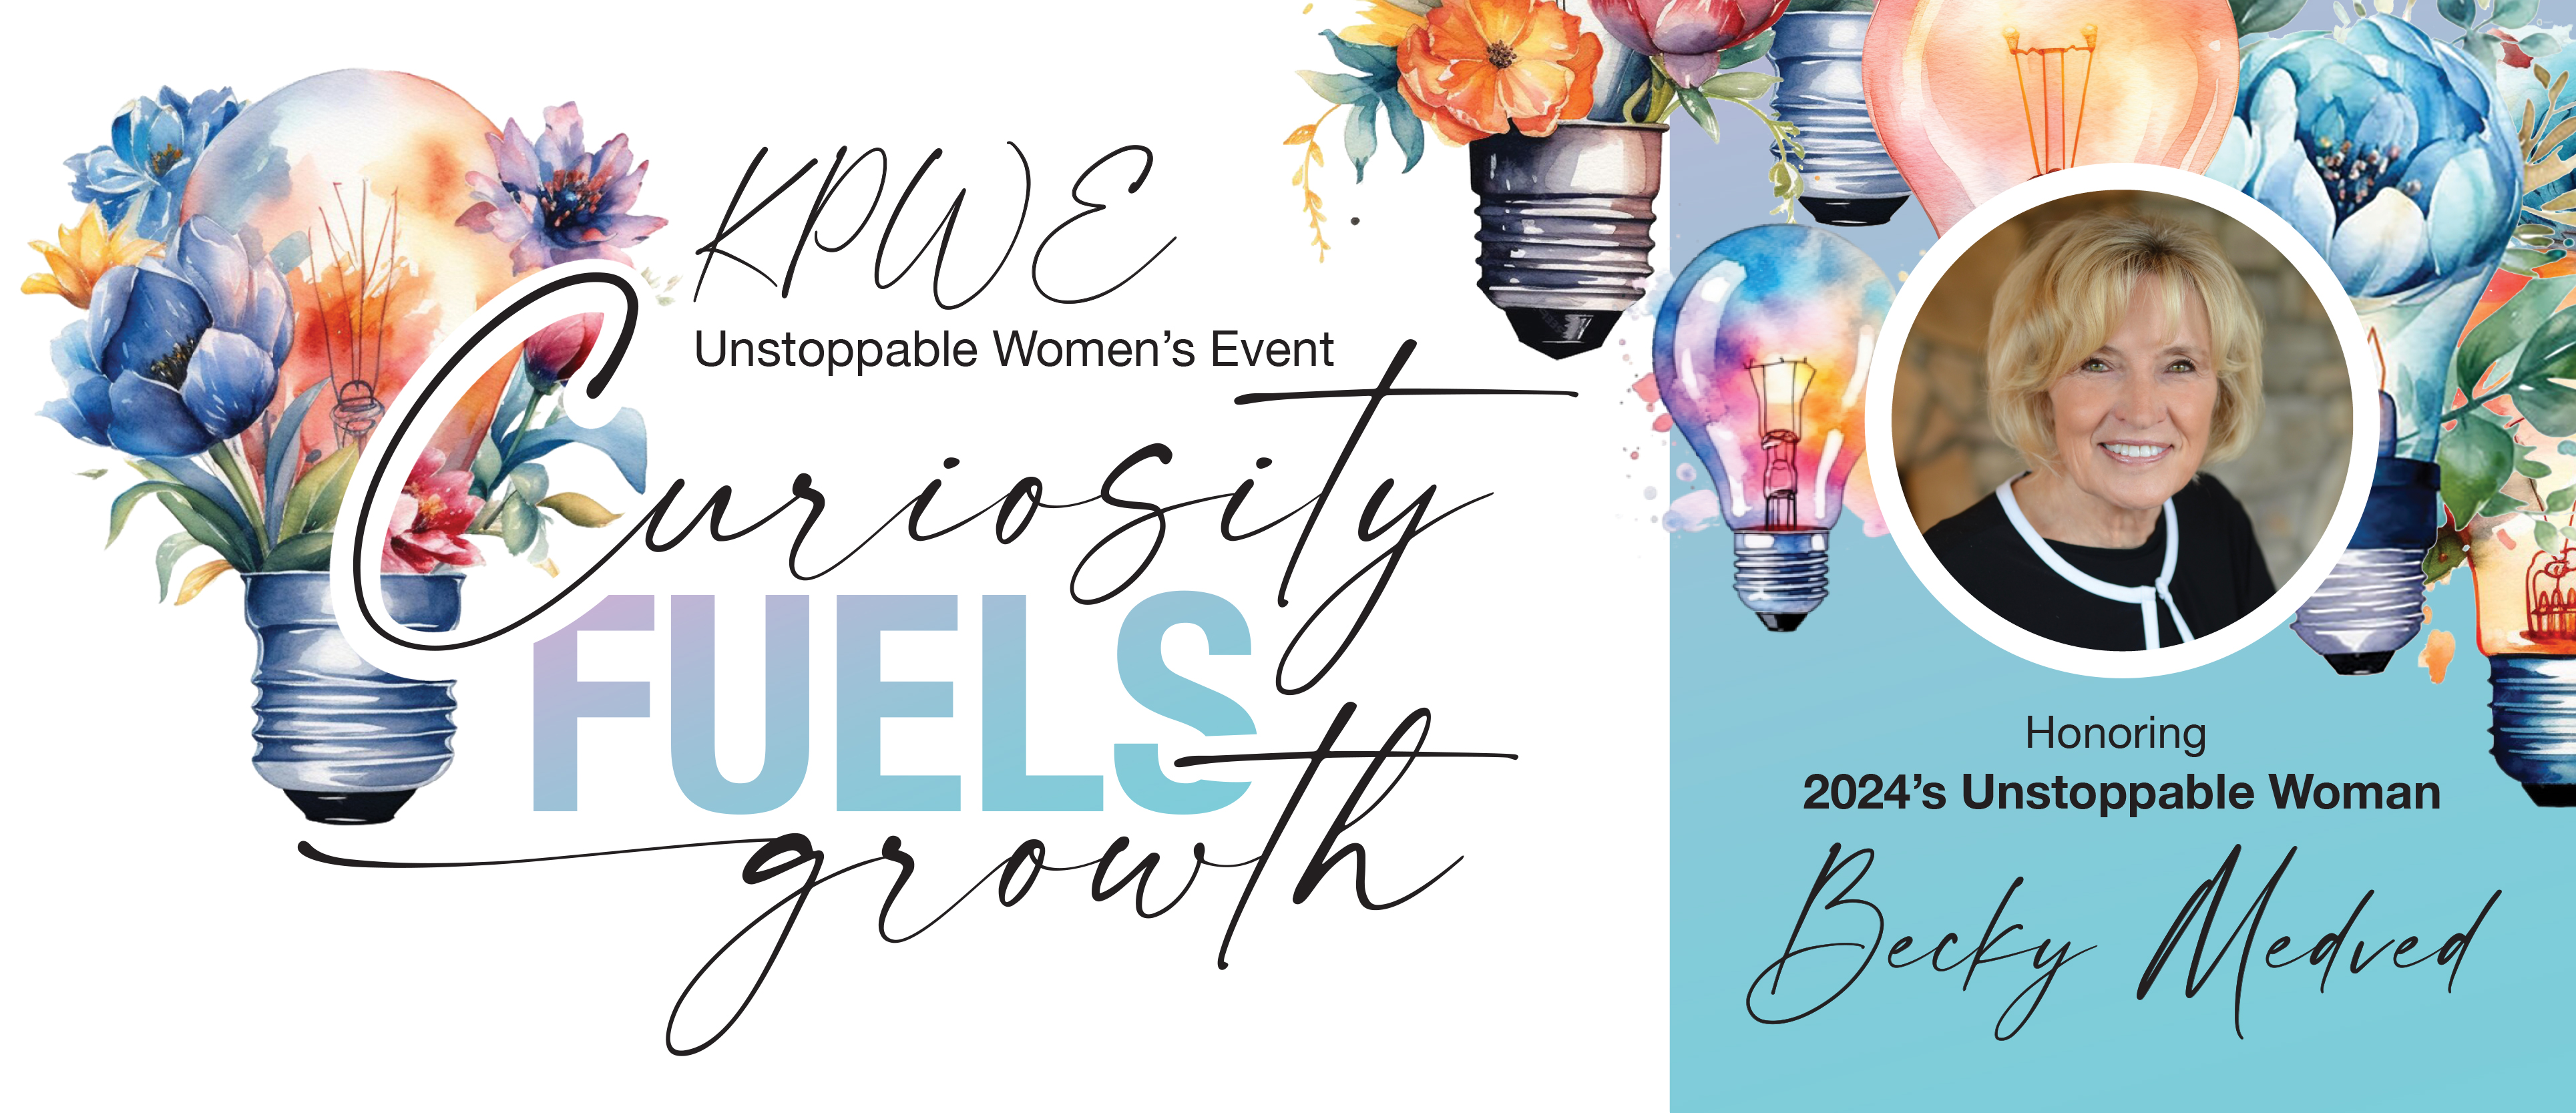 KPWE 2024 Unstoppable Women's Event Graphic